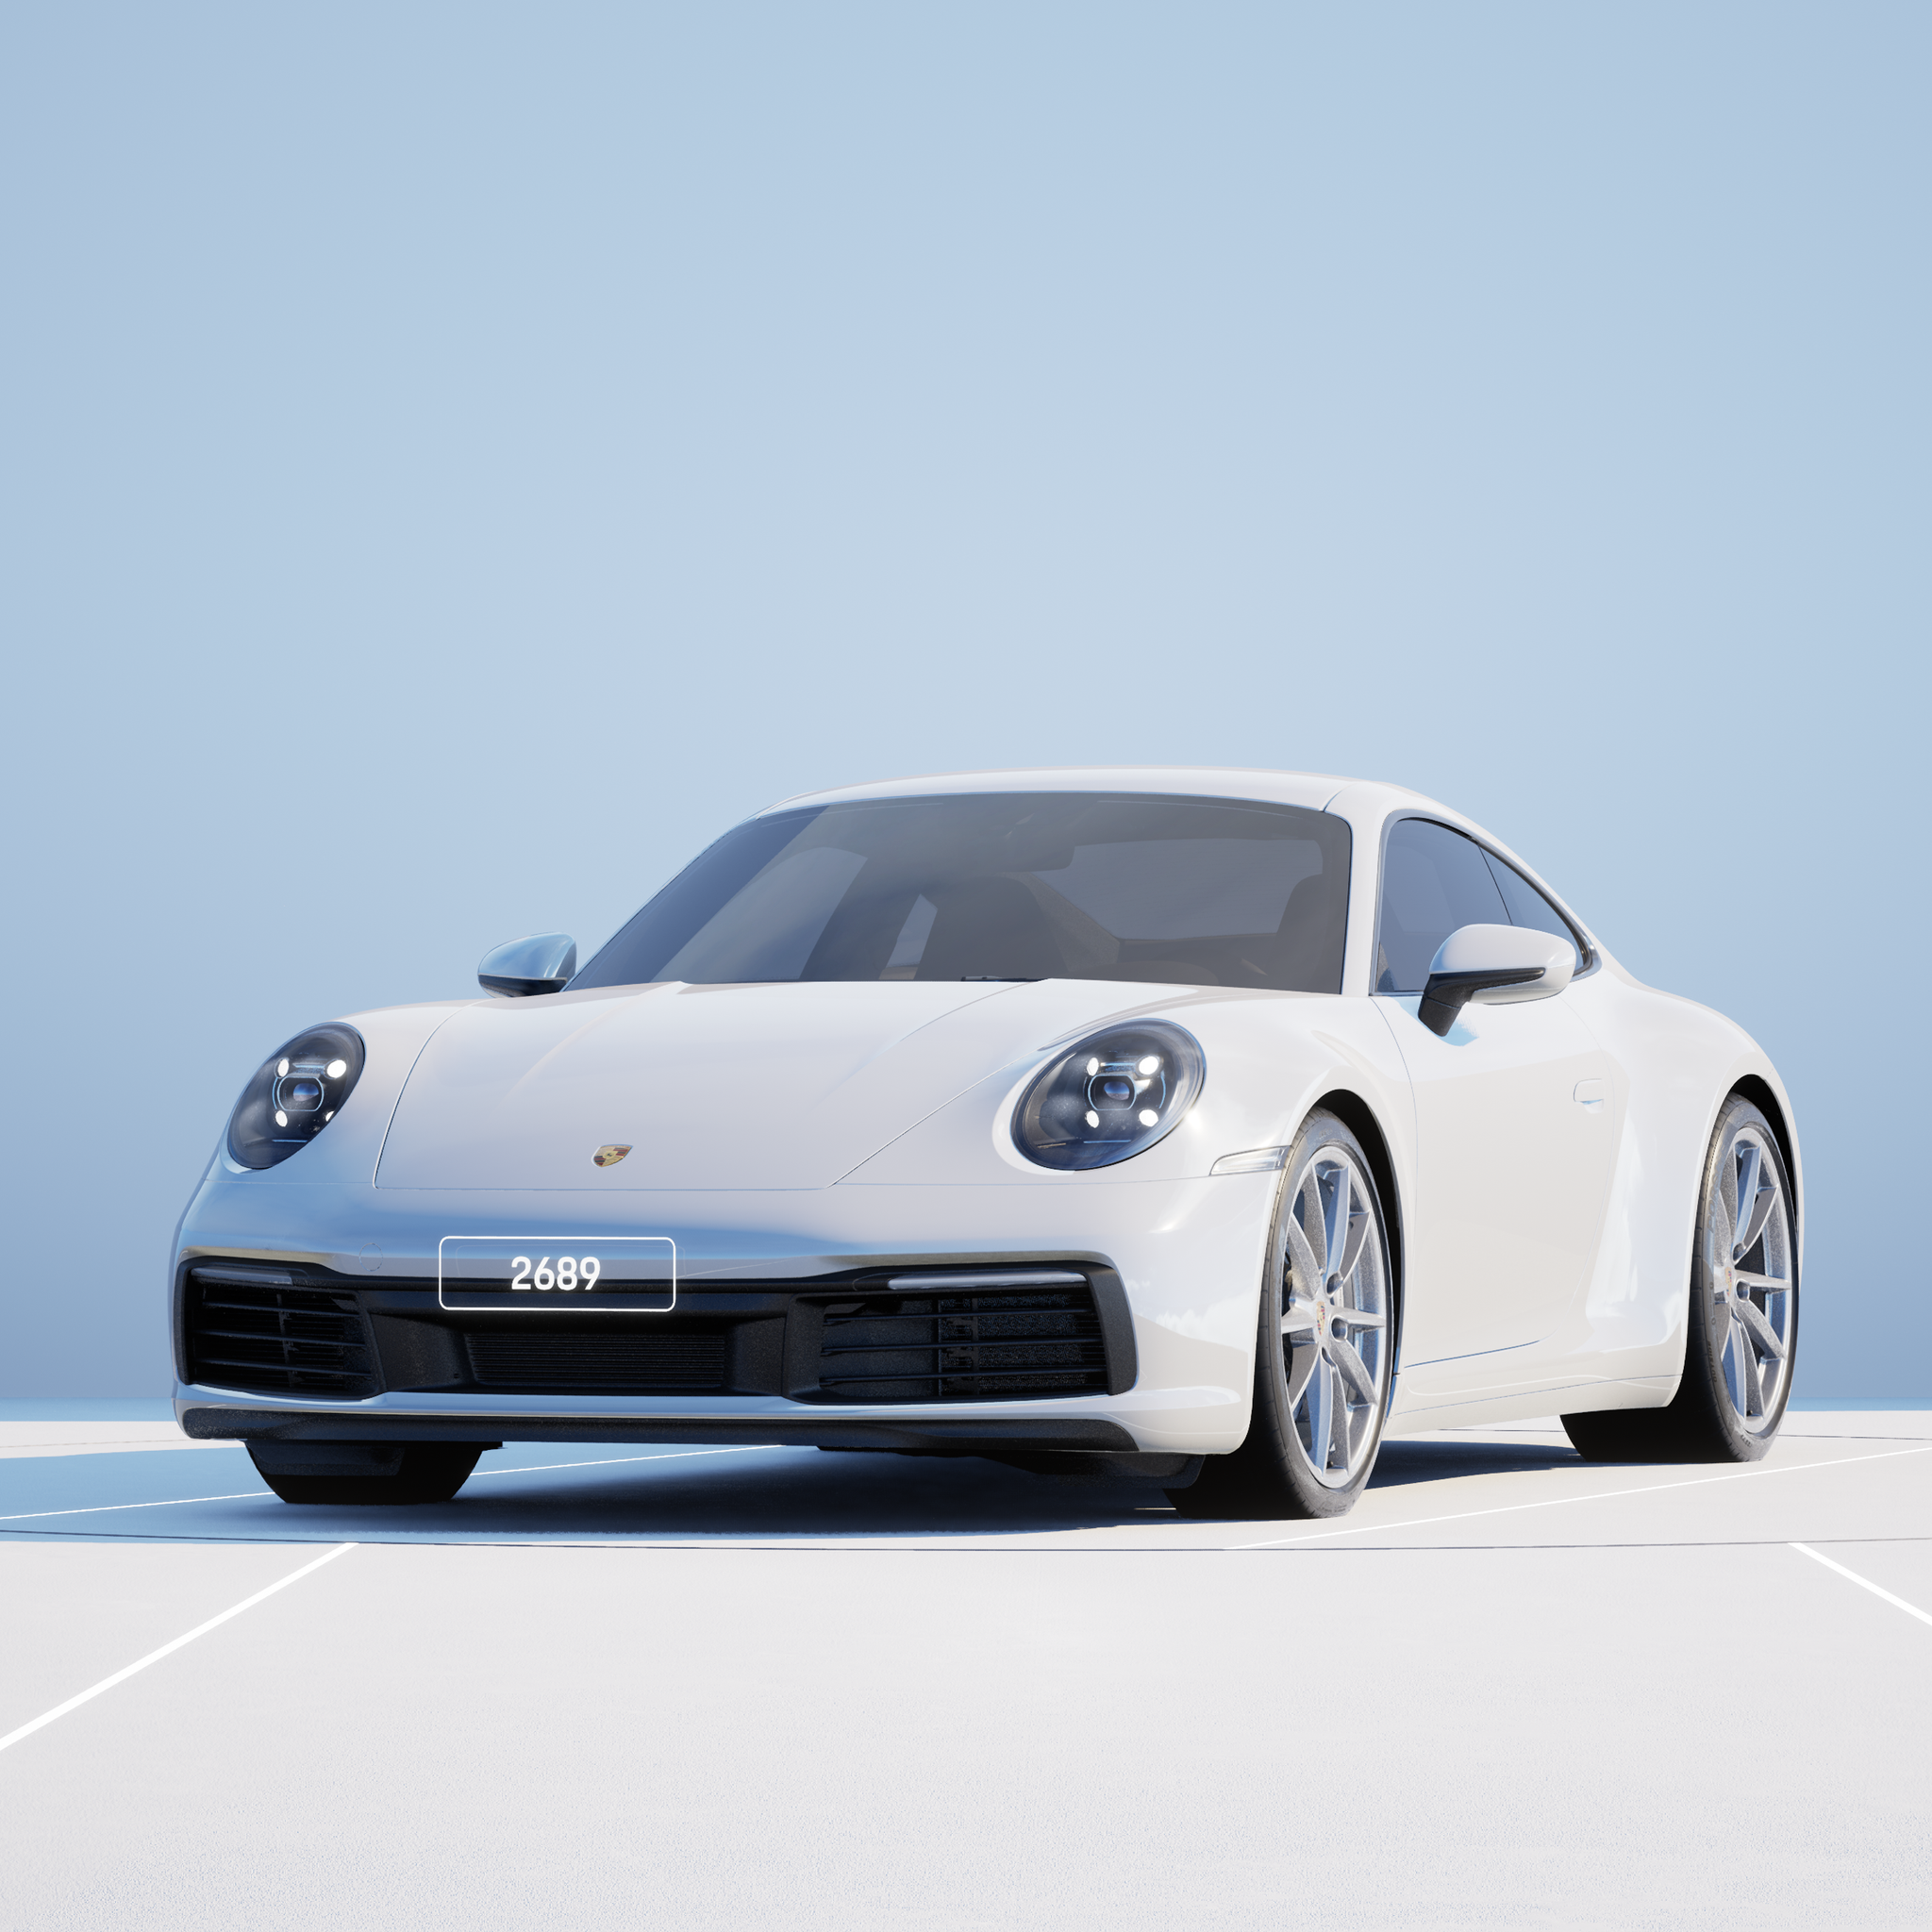 The PORSCHΞ 911 2689 image in phase